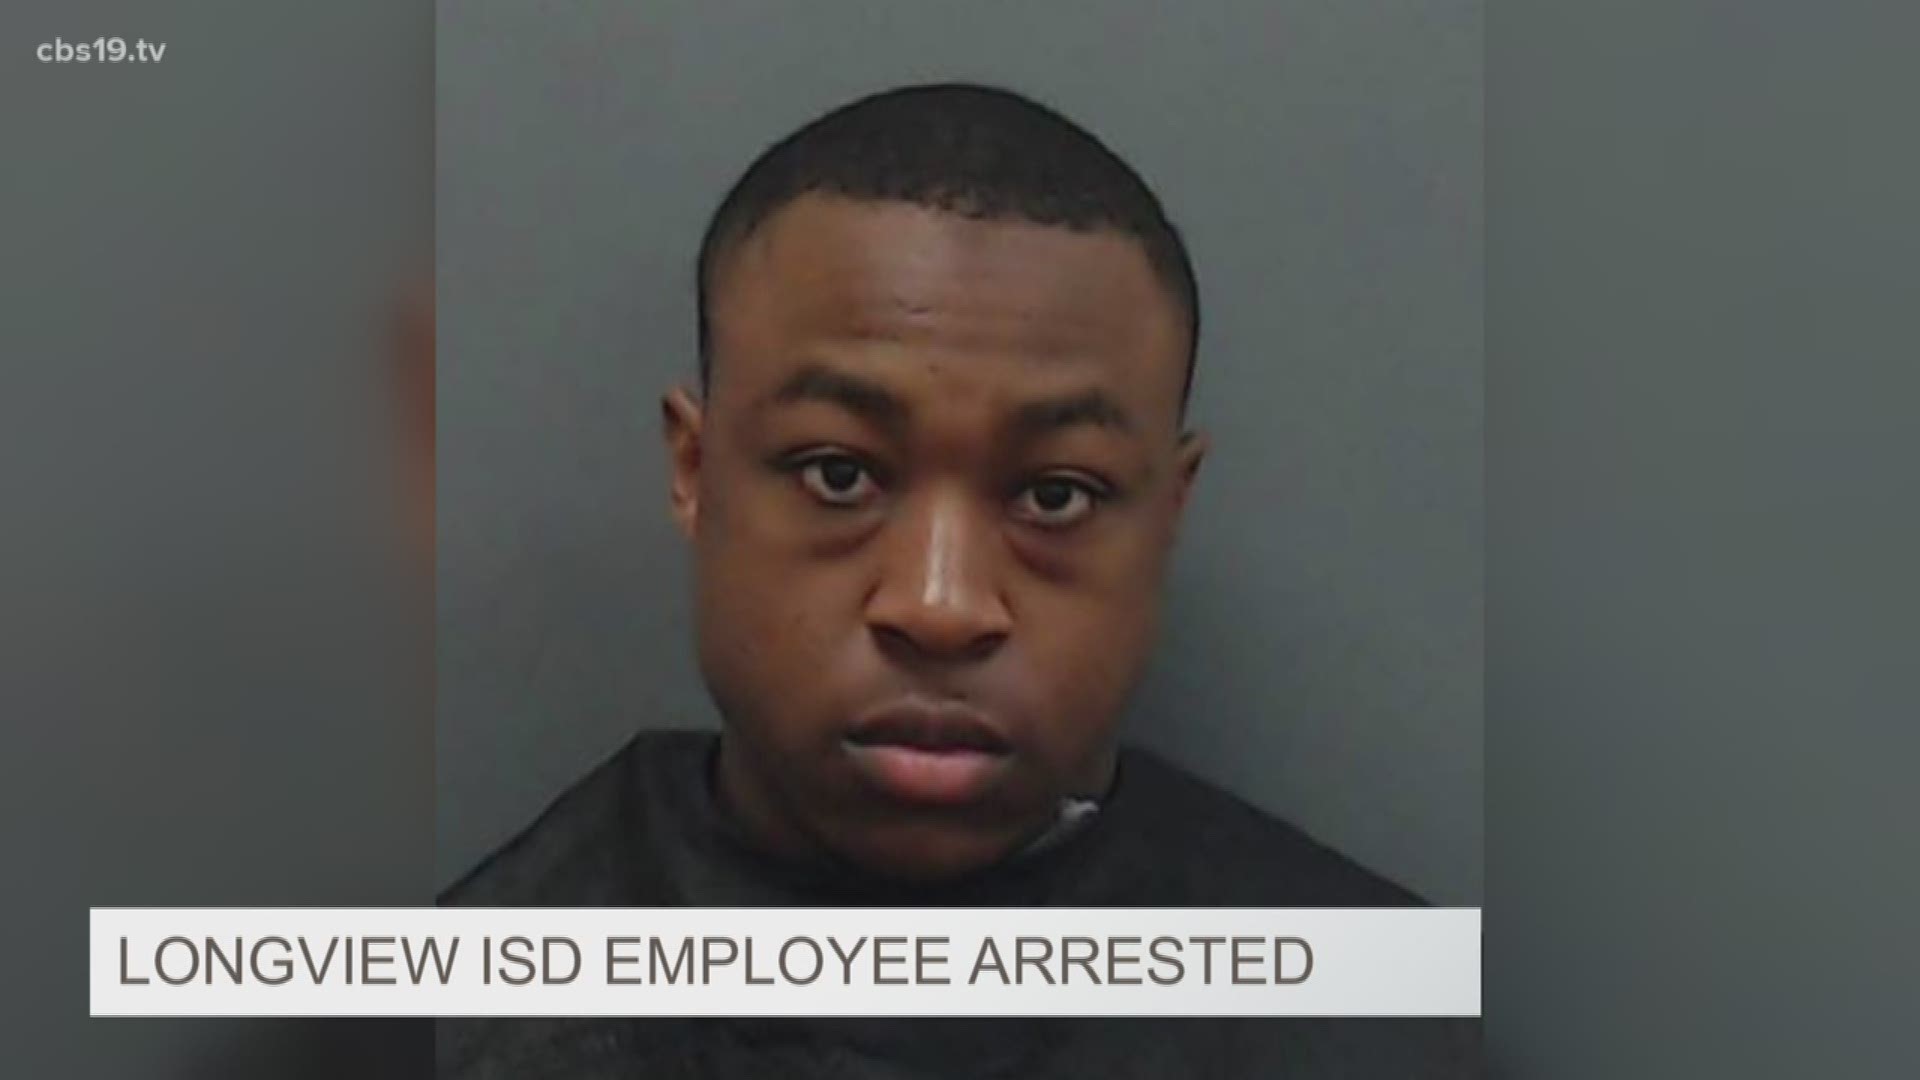 Longview ISD employee arrested for alleged sexual assault